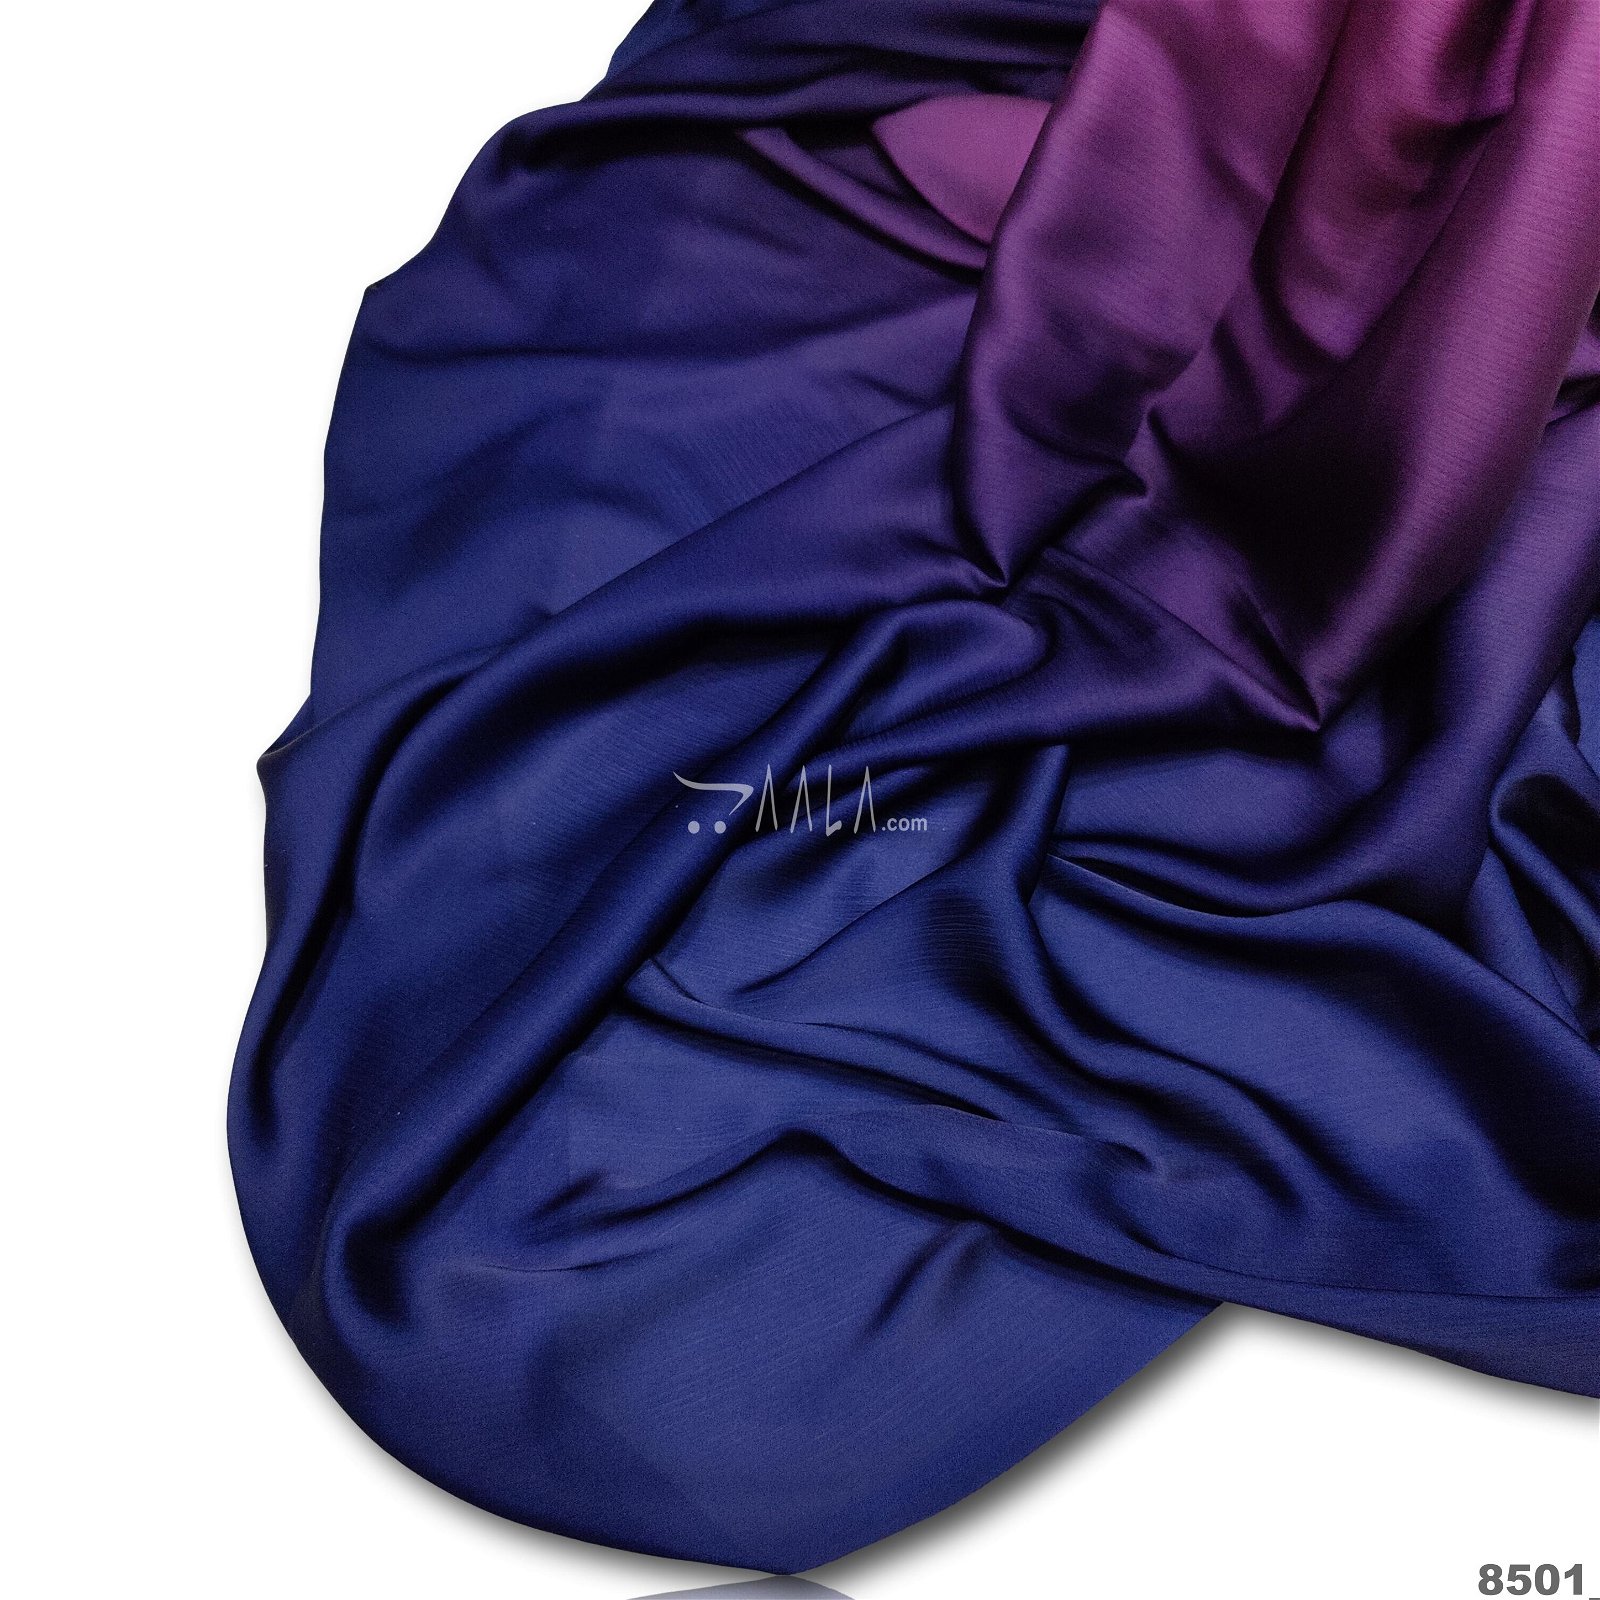 Shaded Satin-Chiffon Poly-ester 44-Inches ASSORTED Per-Metre #8501